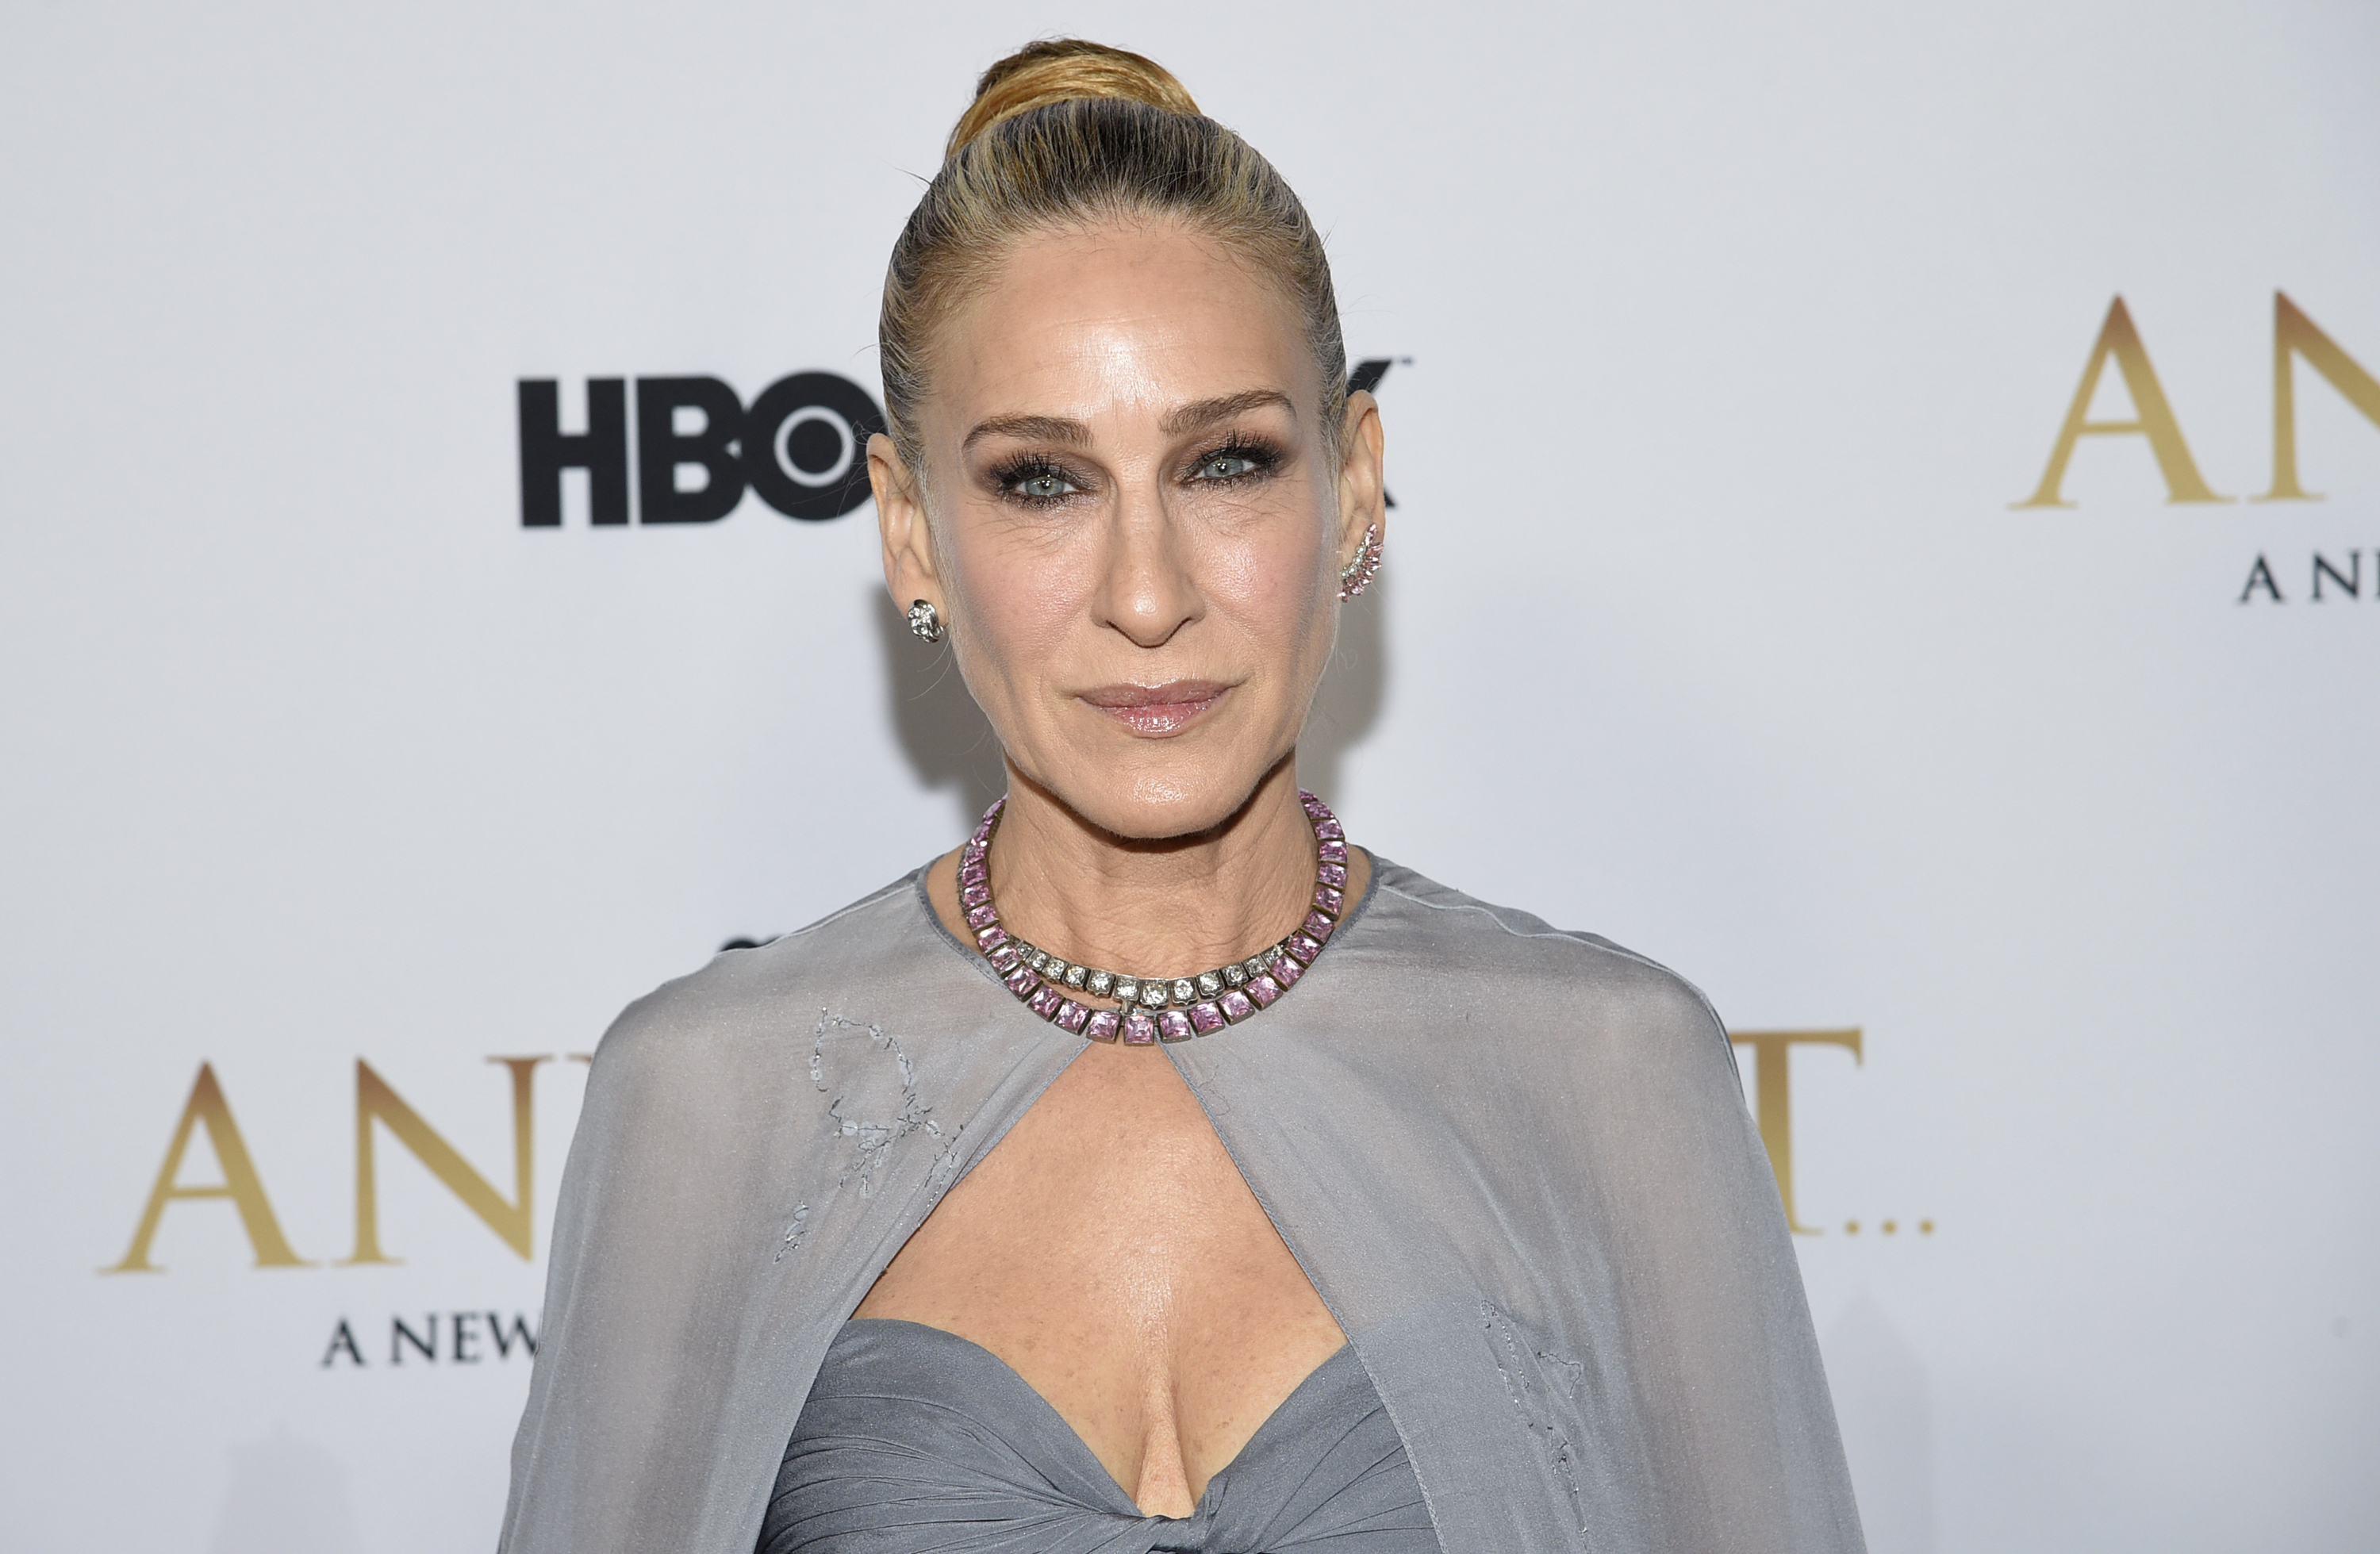 Sarah Jessica Parker attends the premiere of HBO's "And Just Like That" at the Museum of Modern Art on Wednesday, Dec. 8, 2021, in New York. (Photo by Evan Agostini/Invision/AP)